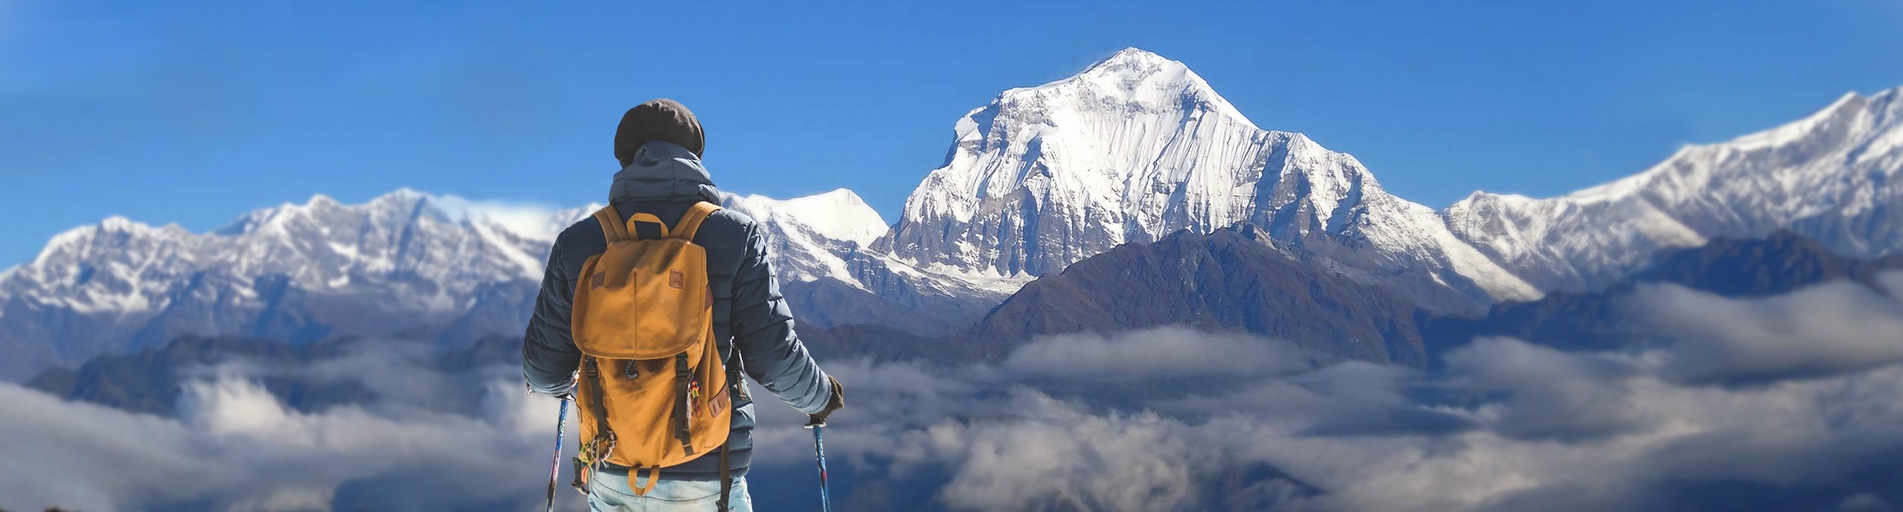 Ready for Adventure? The Dhaulagiri Circuit Trek Might Be for You